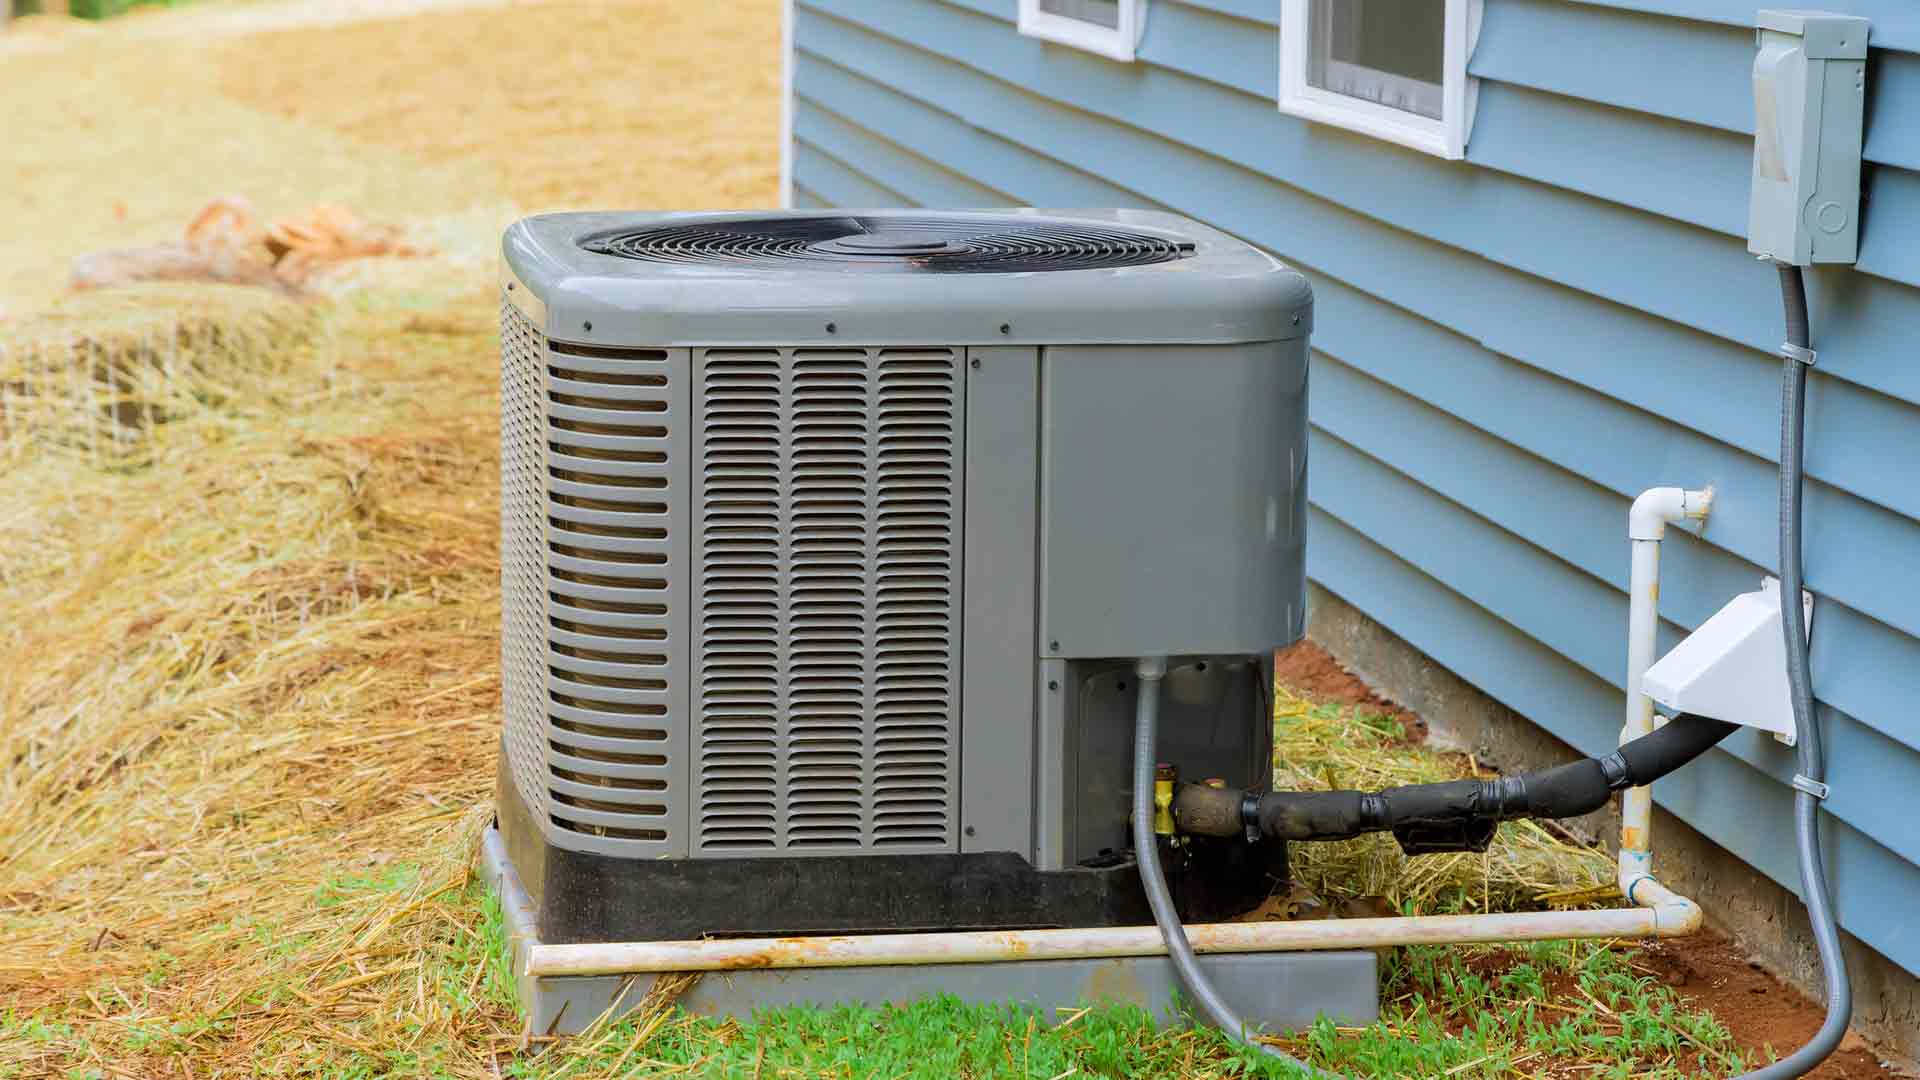 Residential HVAC system behind home